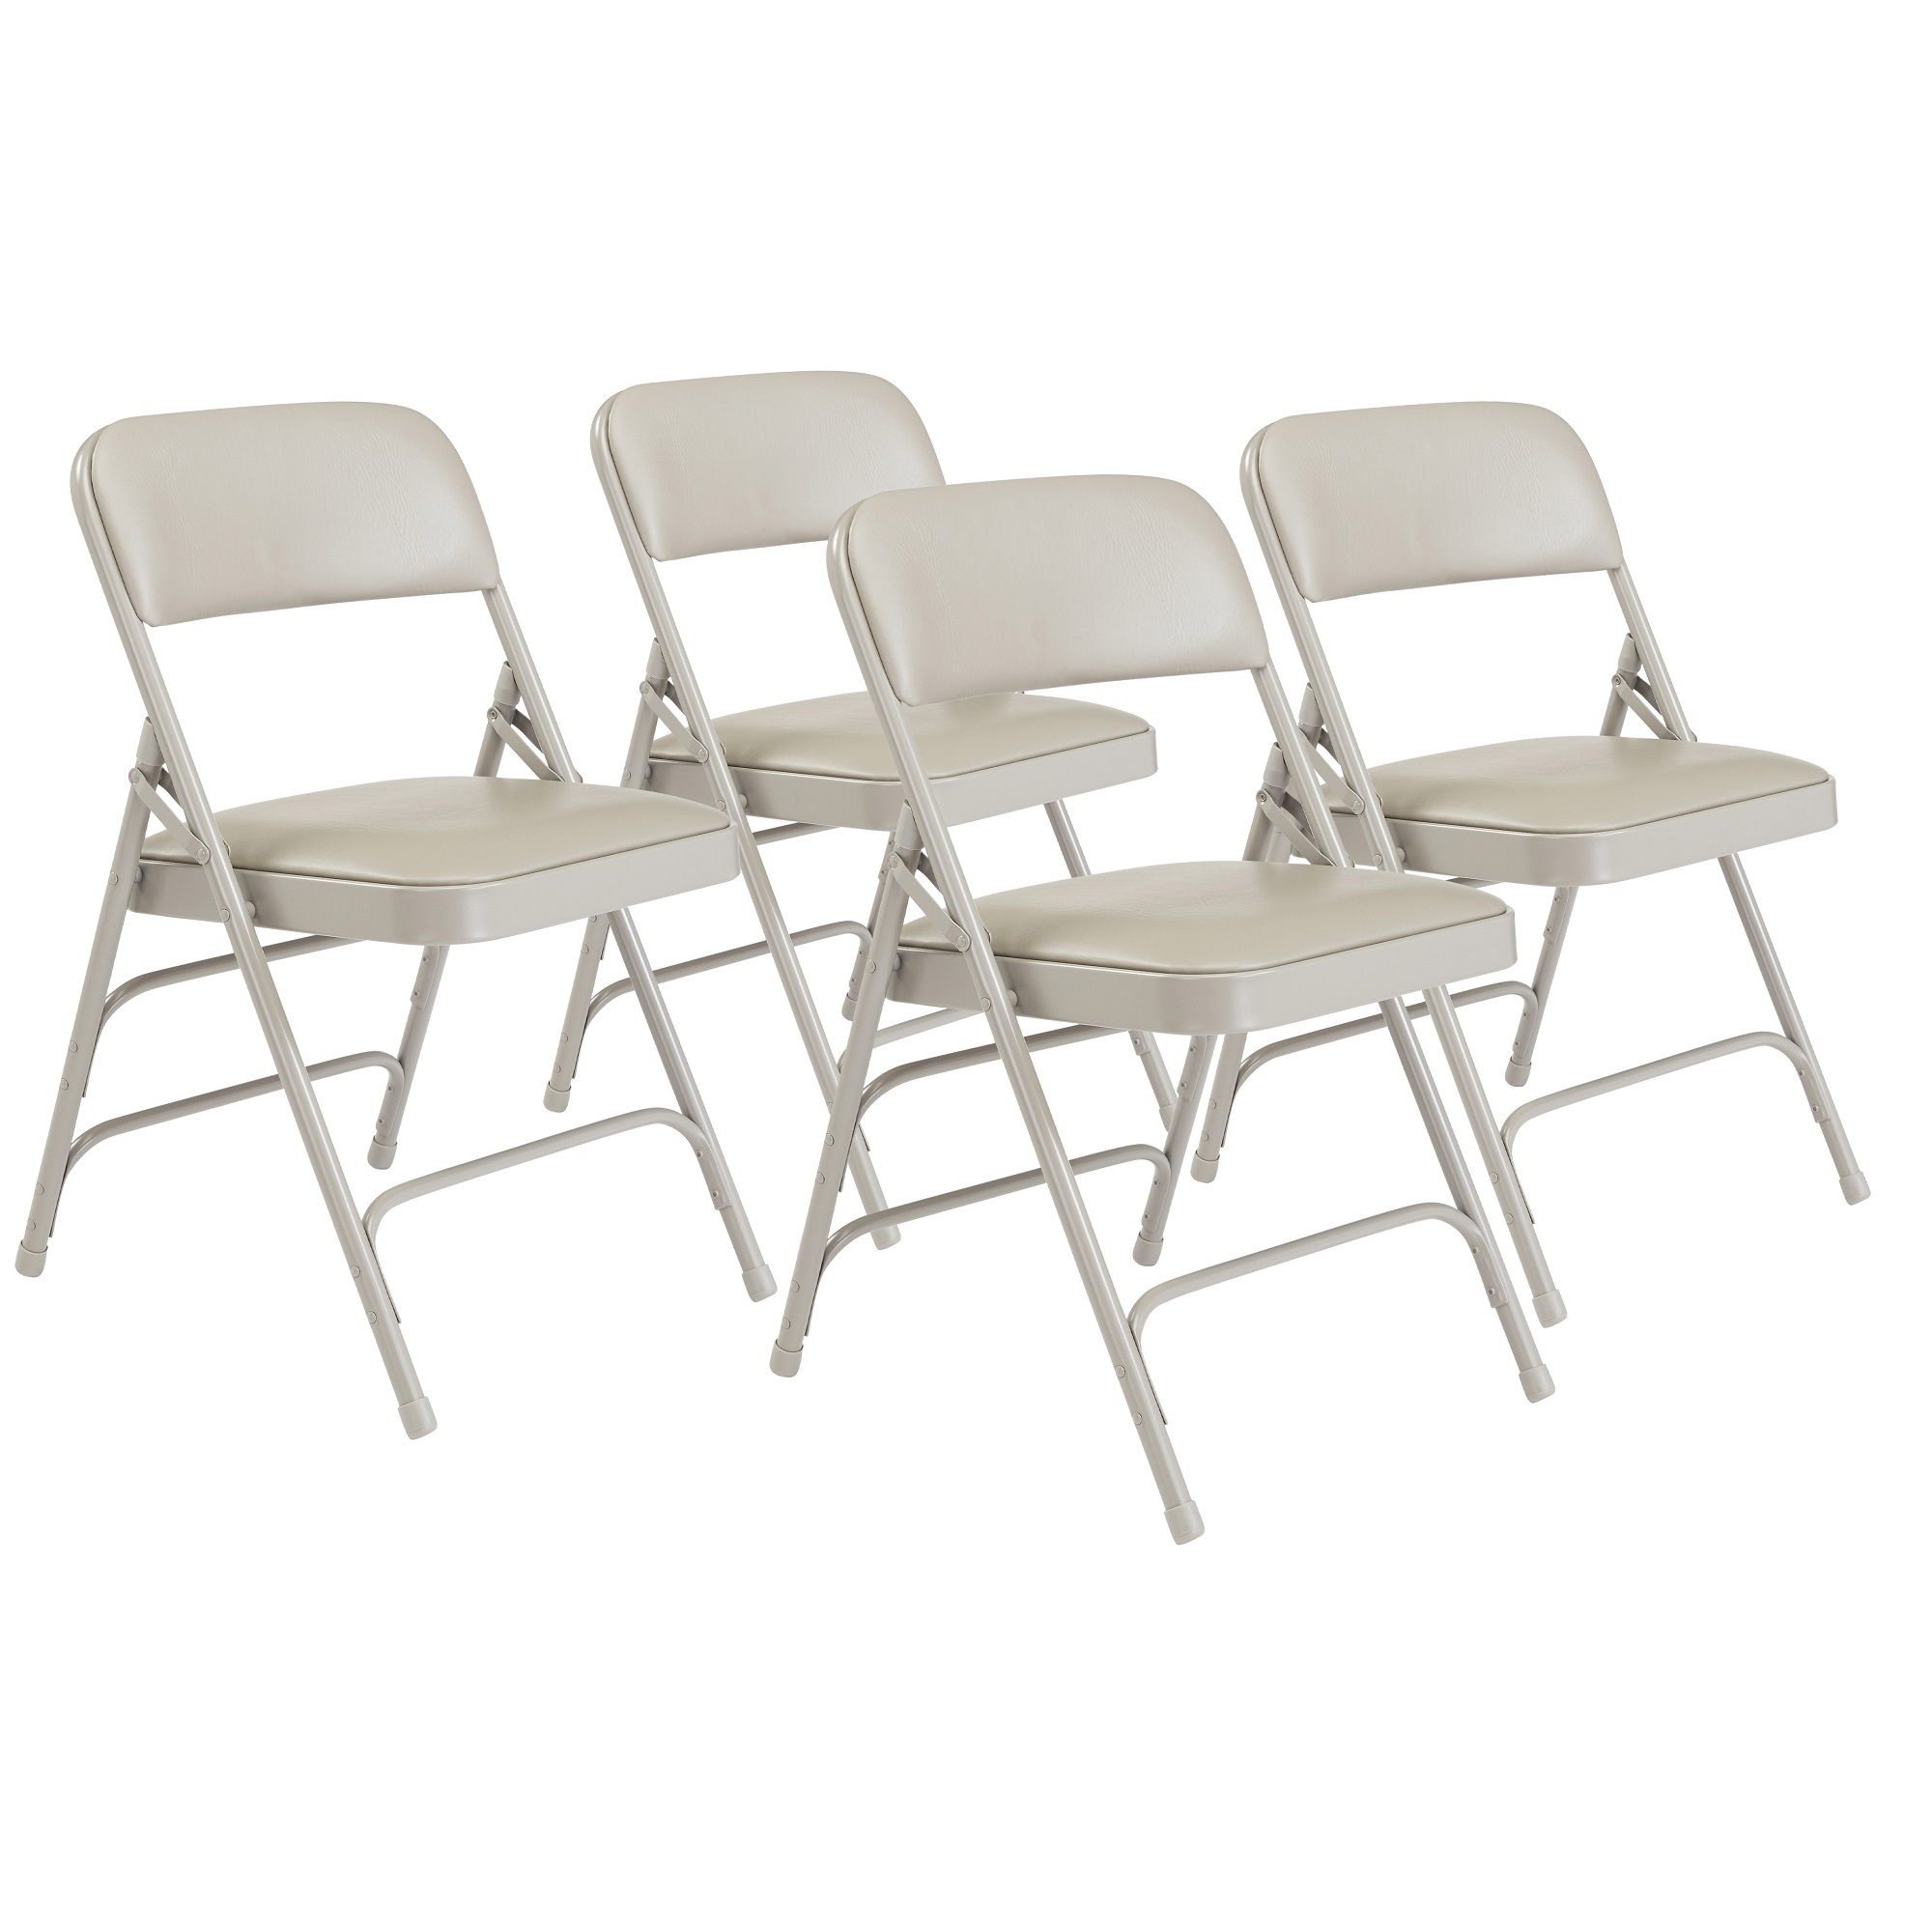 1300 Series Vinyl Upholstered Folding Chair, Primary Color Gray, Included (qty.) 4, Seating Type Folding Chair, Model - National Public Seating 1302